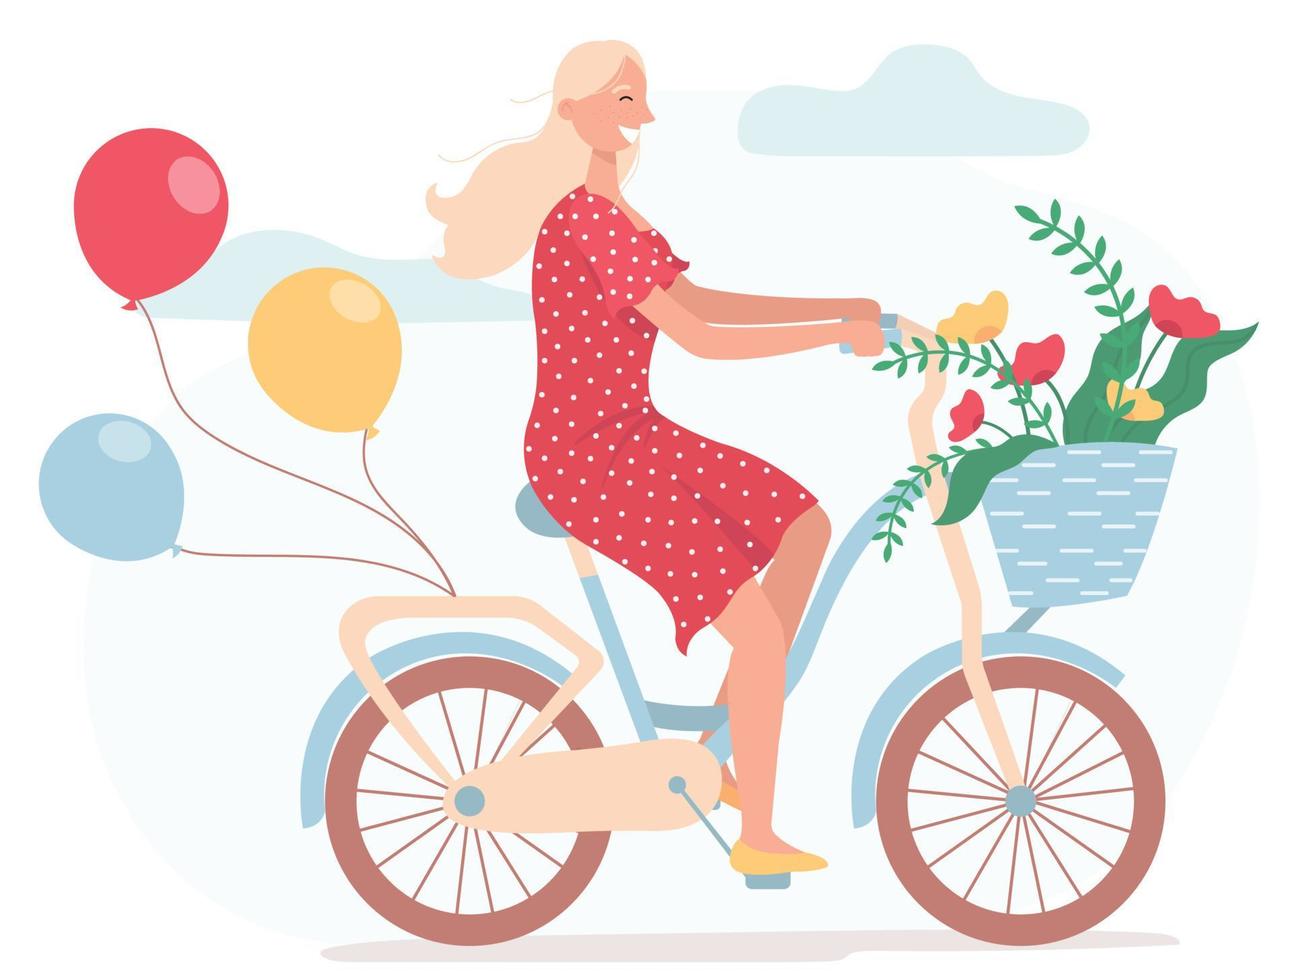 Funny smiling girl dressed in red dress riding bicycle with balloons and with wicker basket full of spring flowers. Cute happy young woman on bike. Flat vector illustration on a white background.